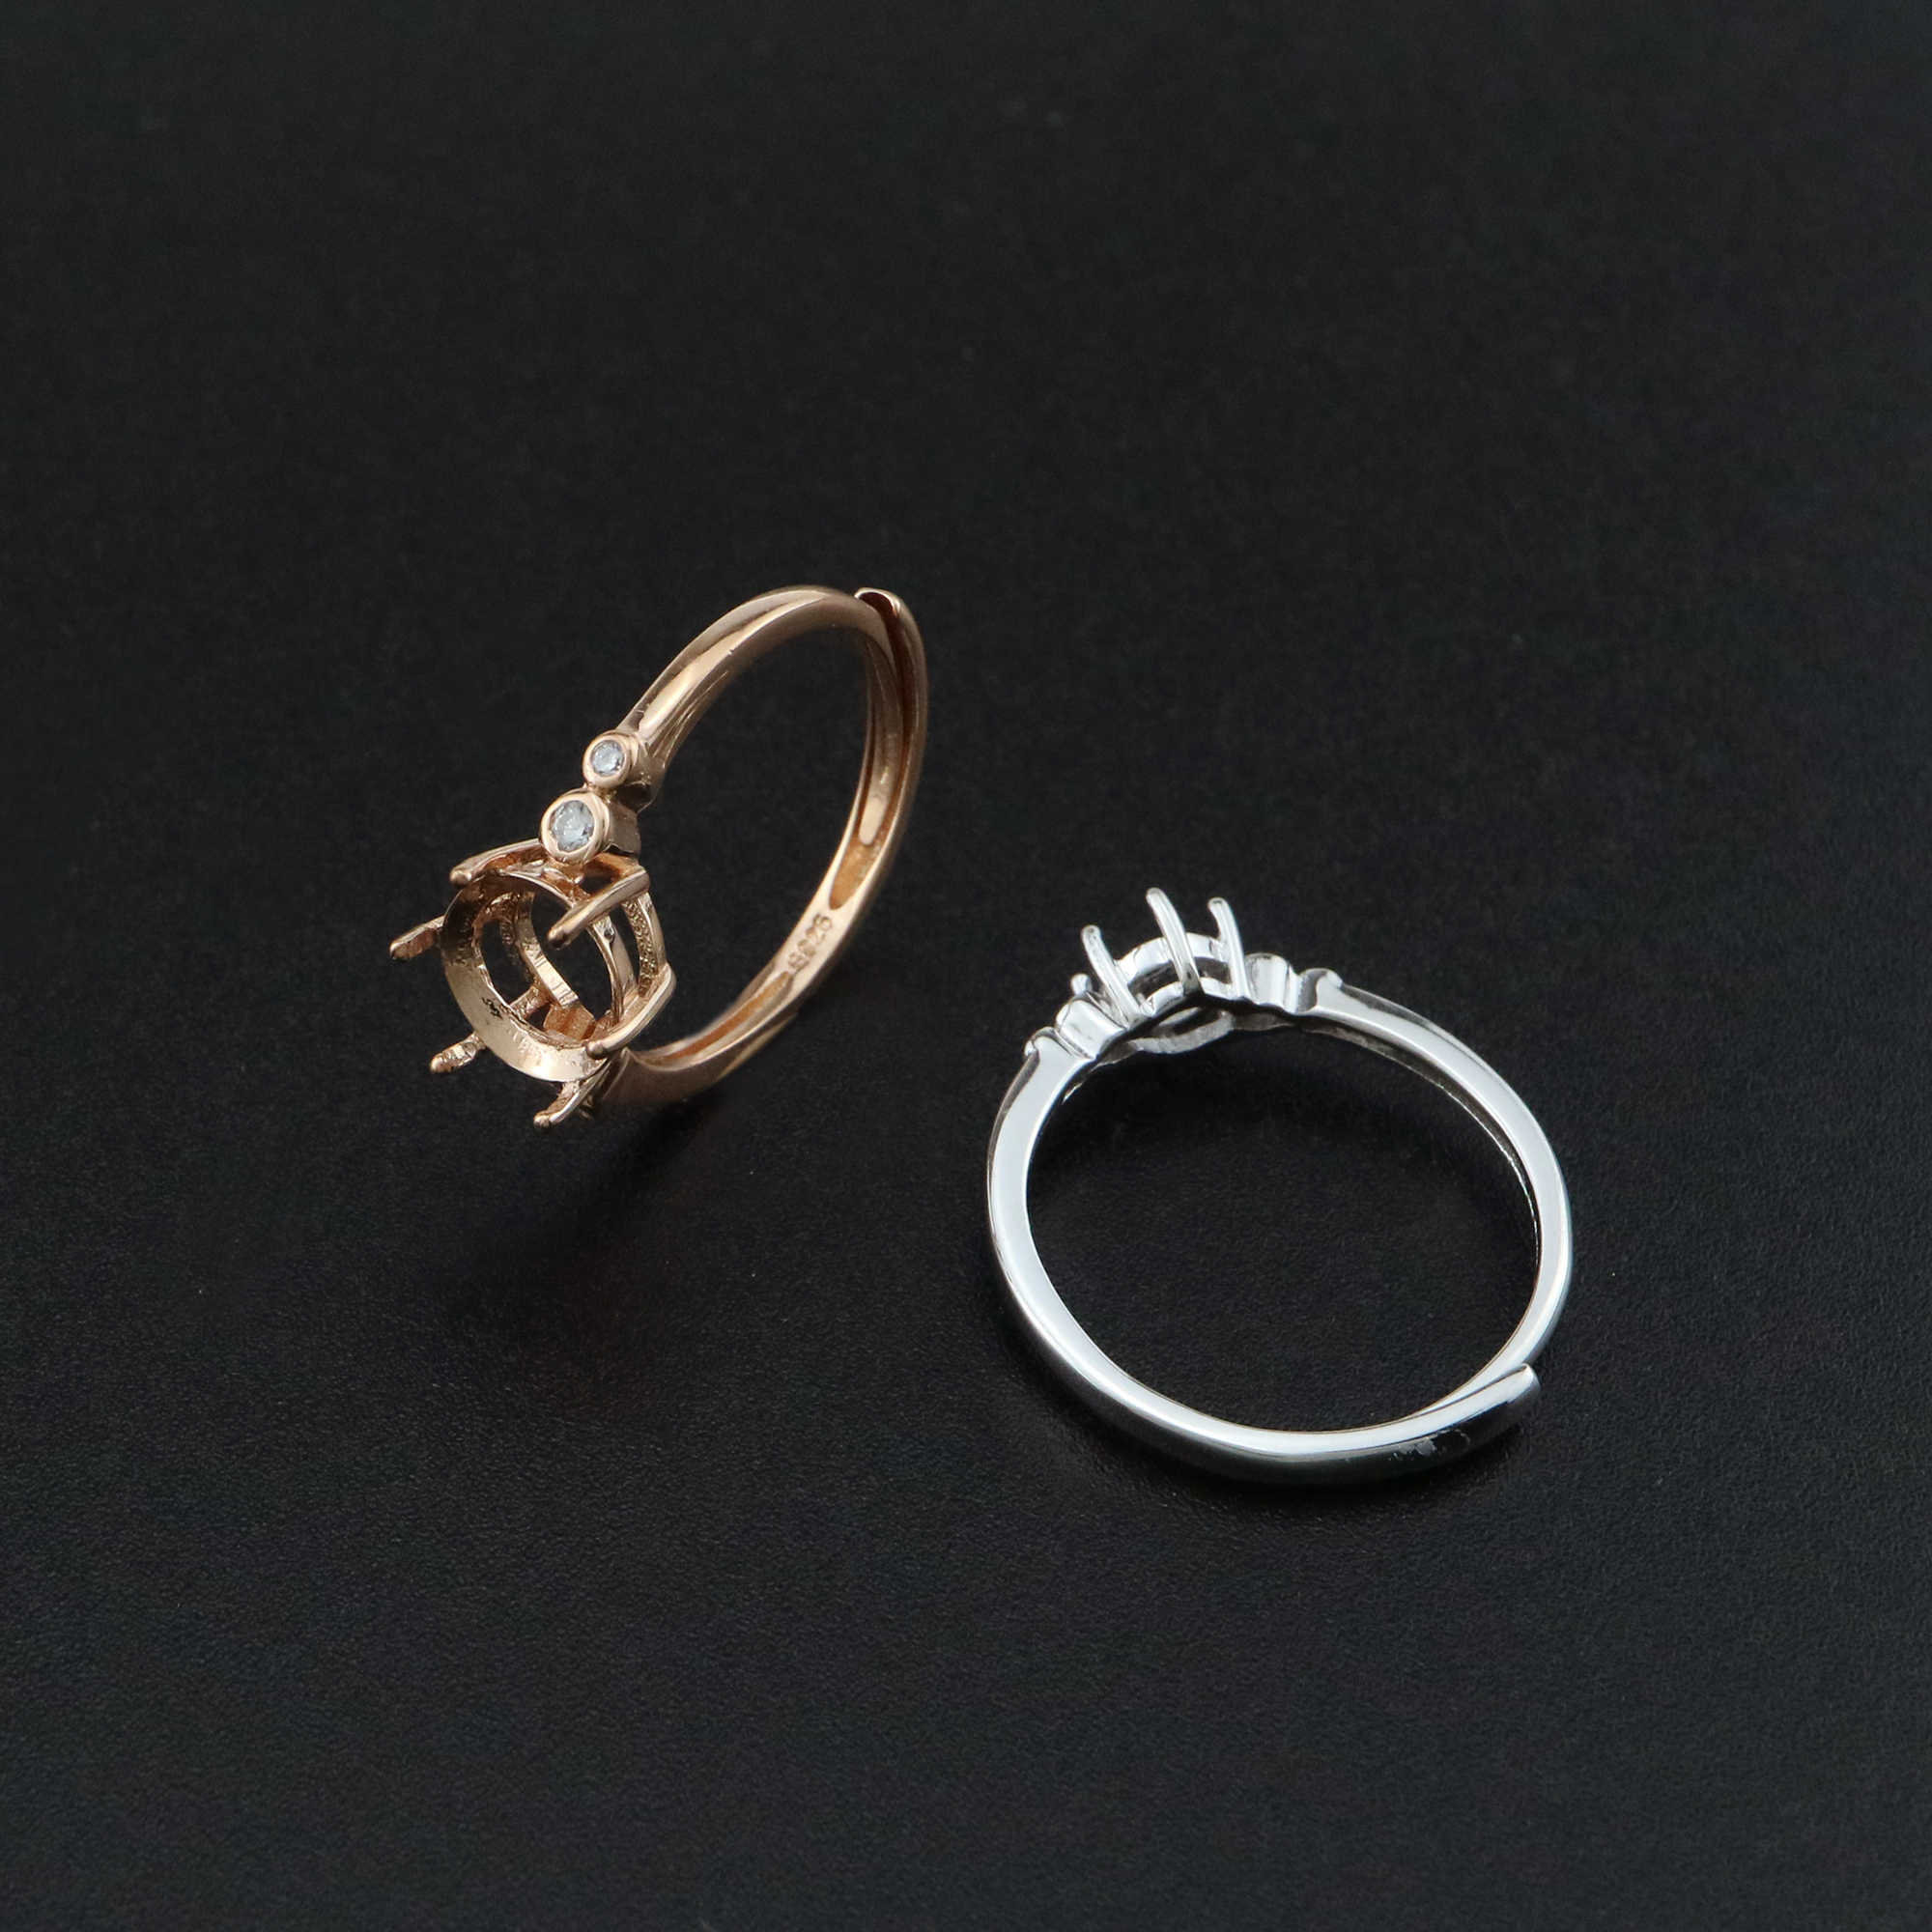 1Pcs 4-15MM Round Prong Bezel Rose Gold Plated Solid 925 Sterling Silver Adjustable Ring Settings for Moissanite Gemstone DIY Supplies 1210053 - Click Image to Close